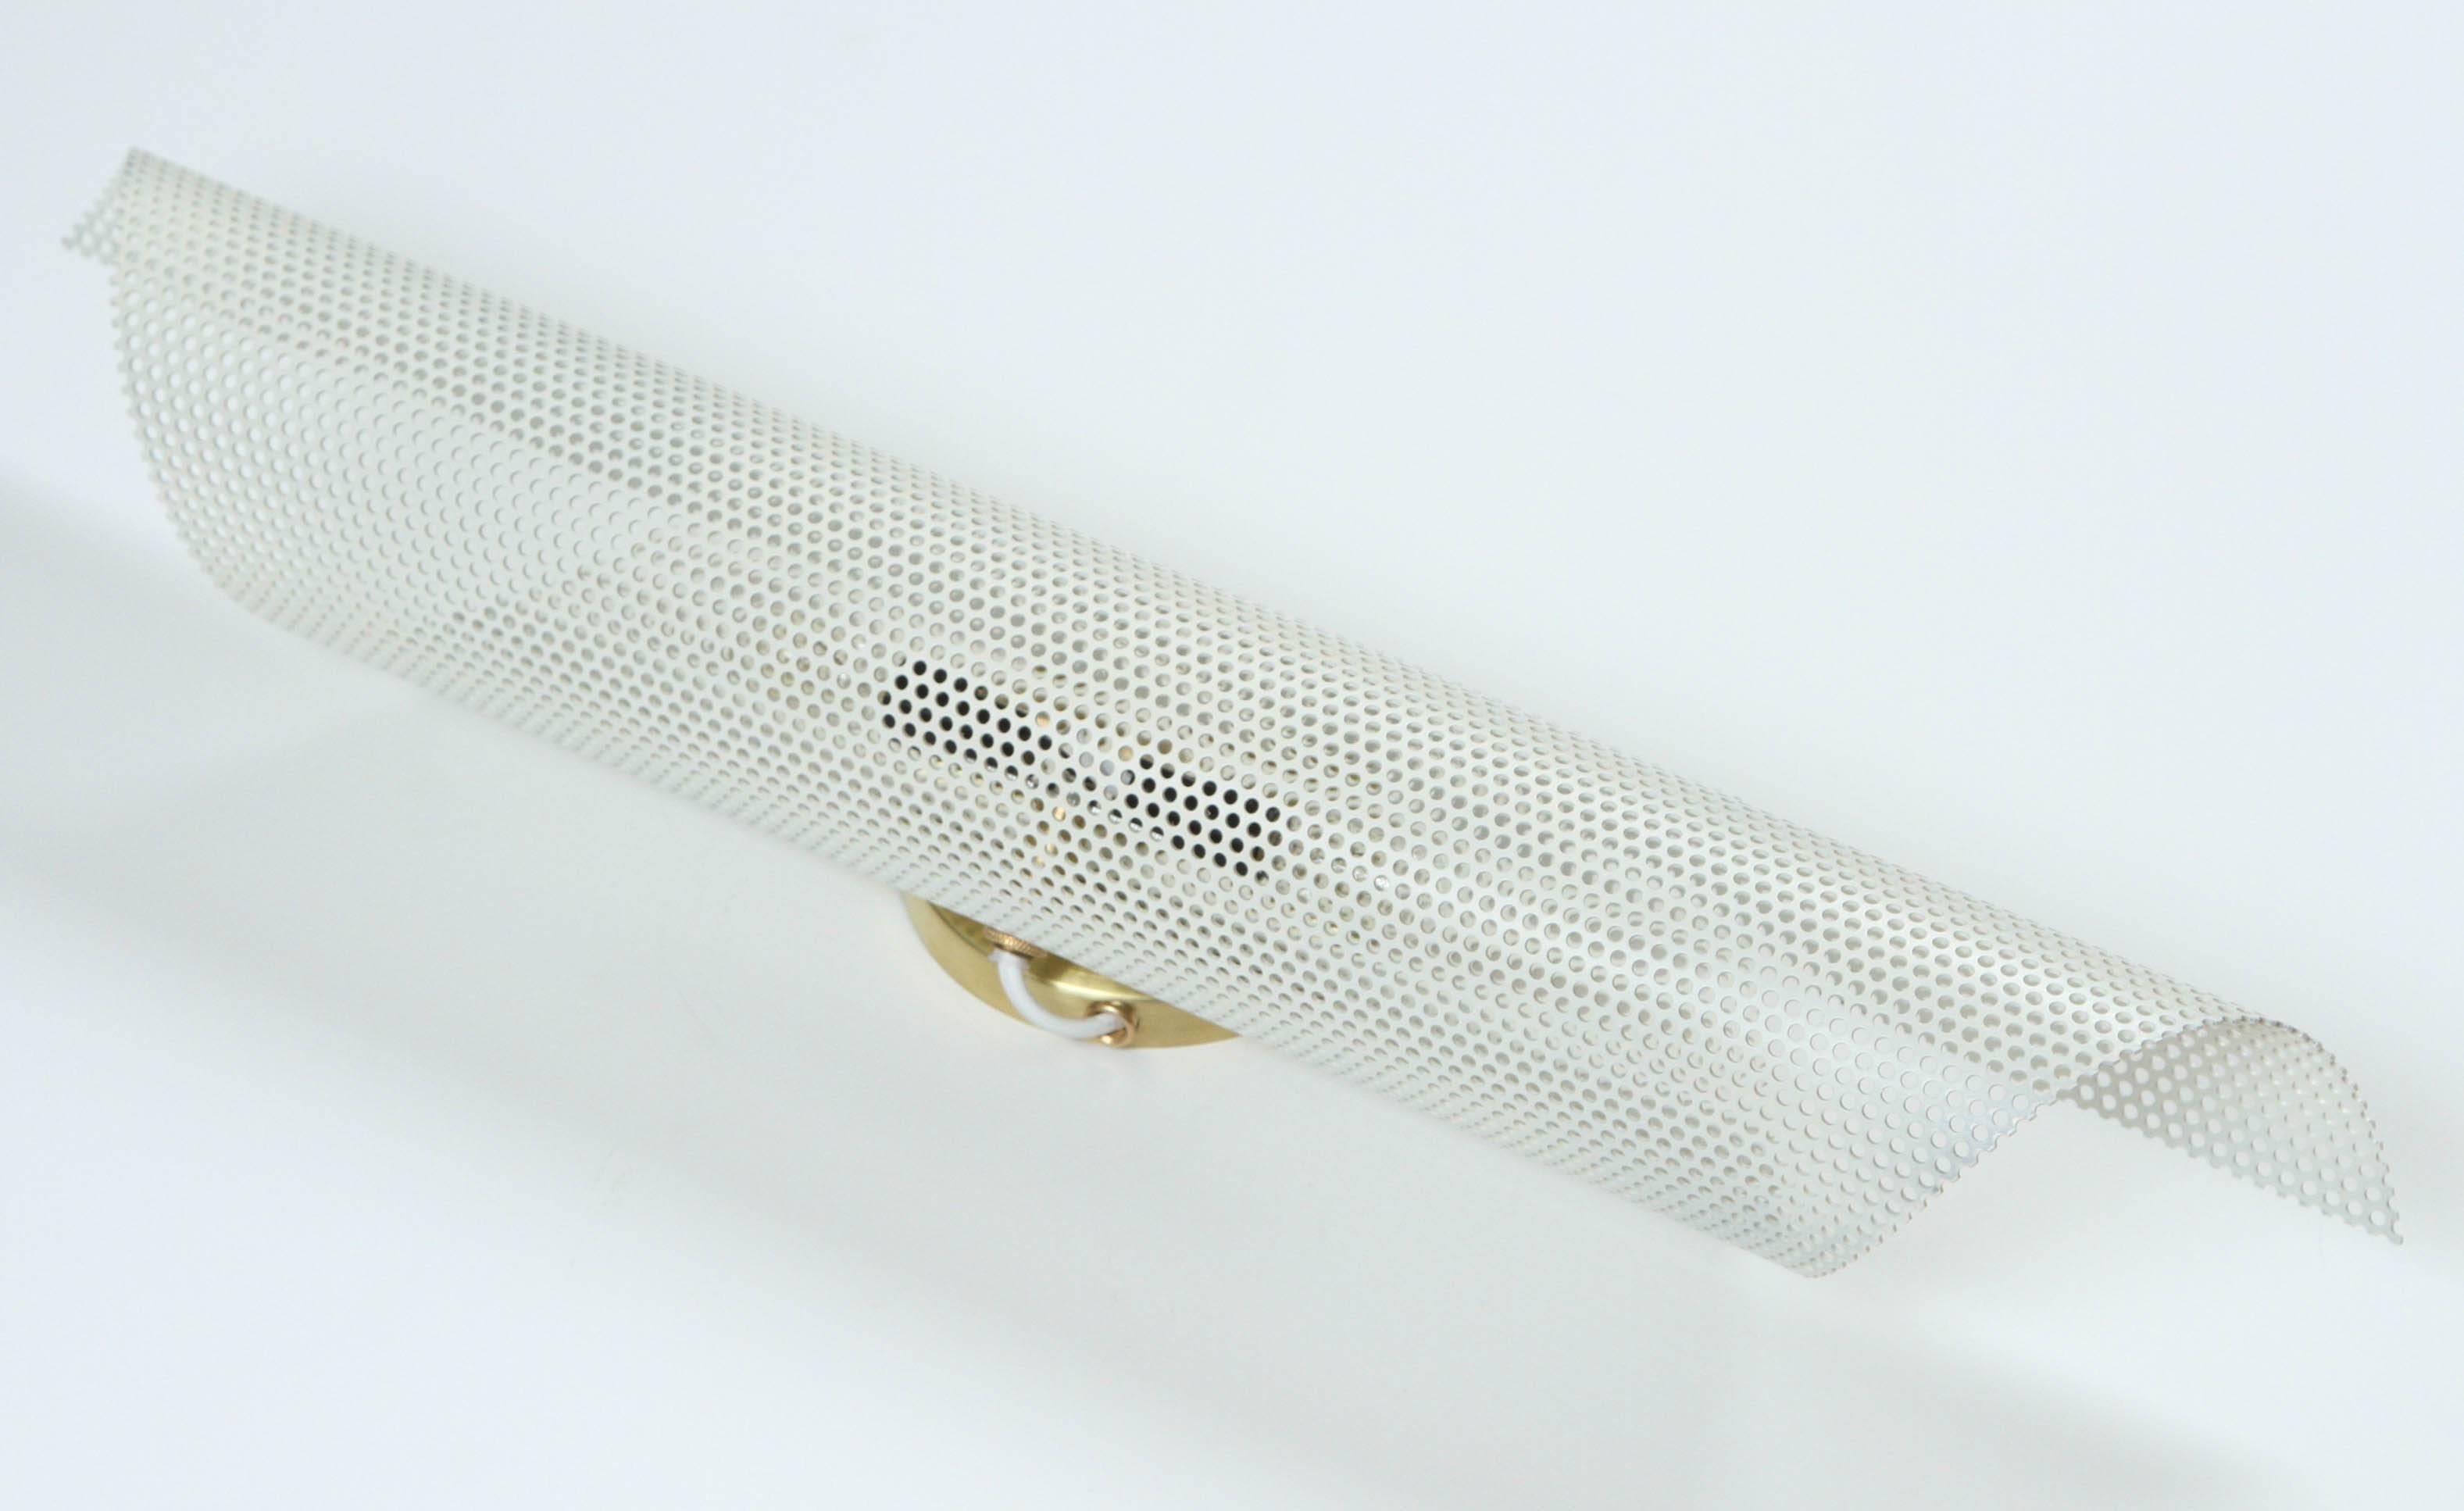 Rolled perforated sconce by Lawson-Fenning.

Available to order n white or black.